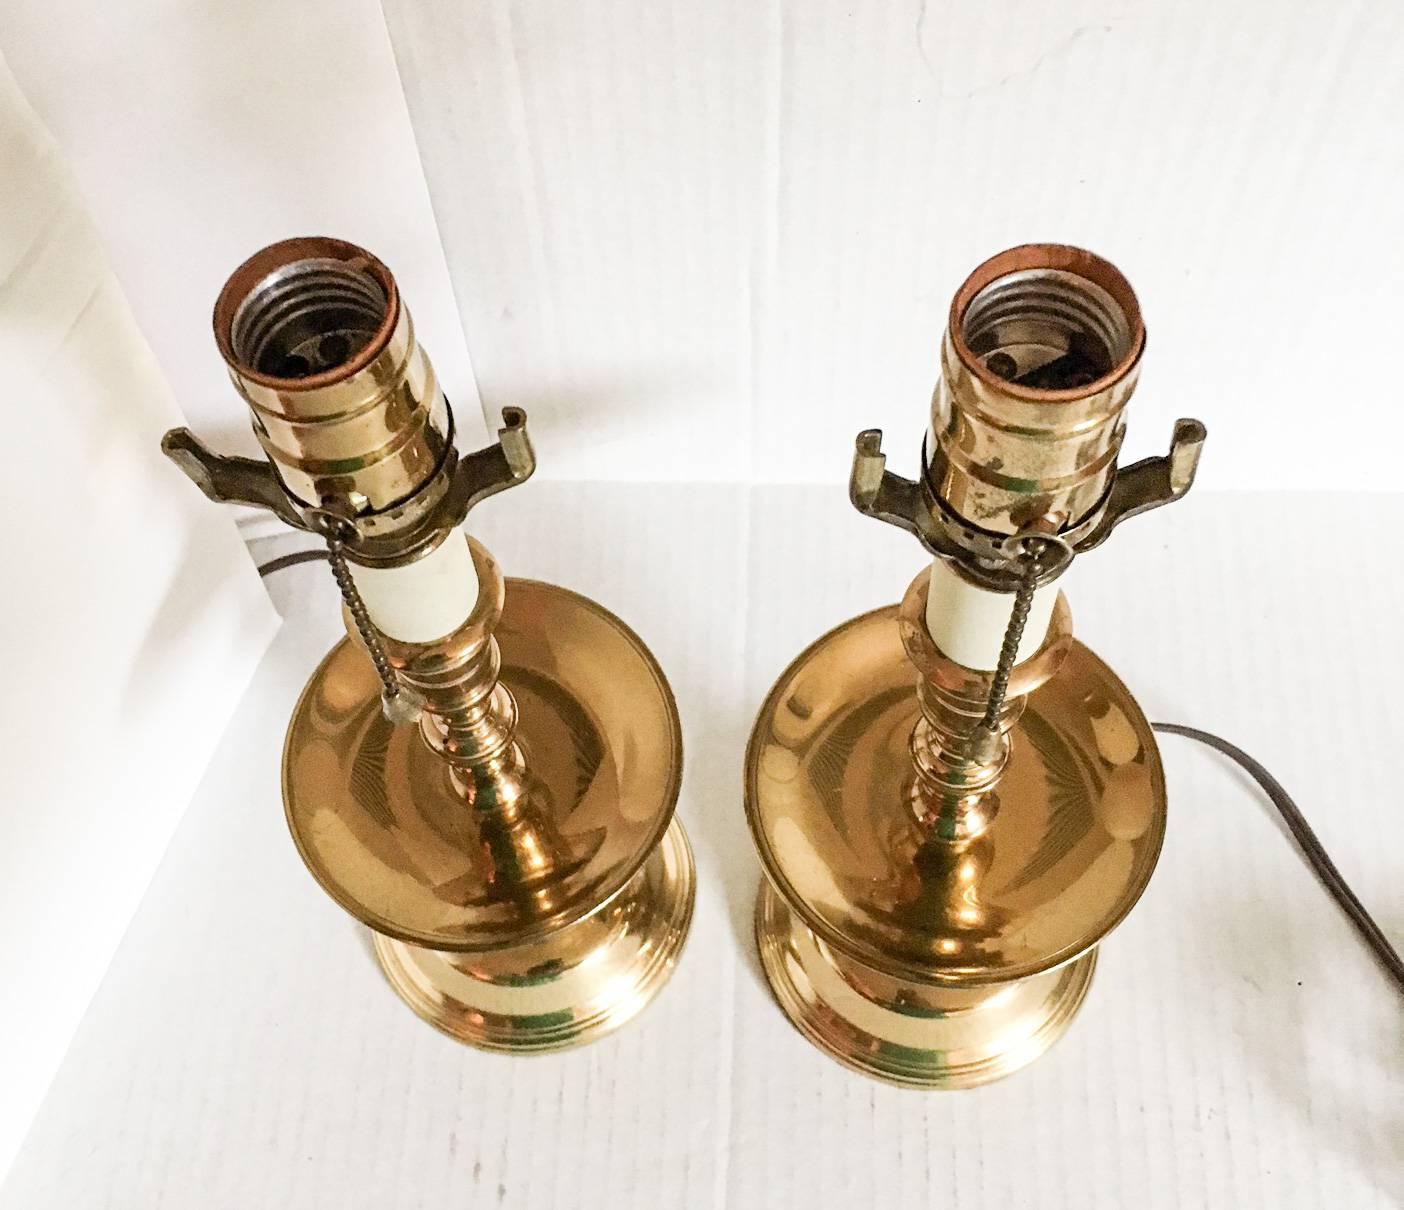 American Classical Virginia Metalcrafters Brass Candlestick Accent Lamps, Pair